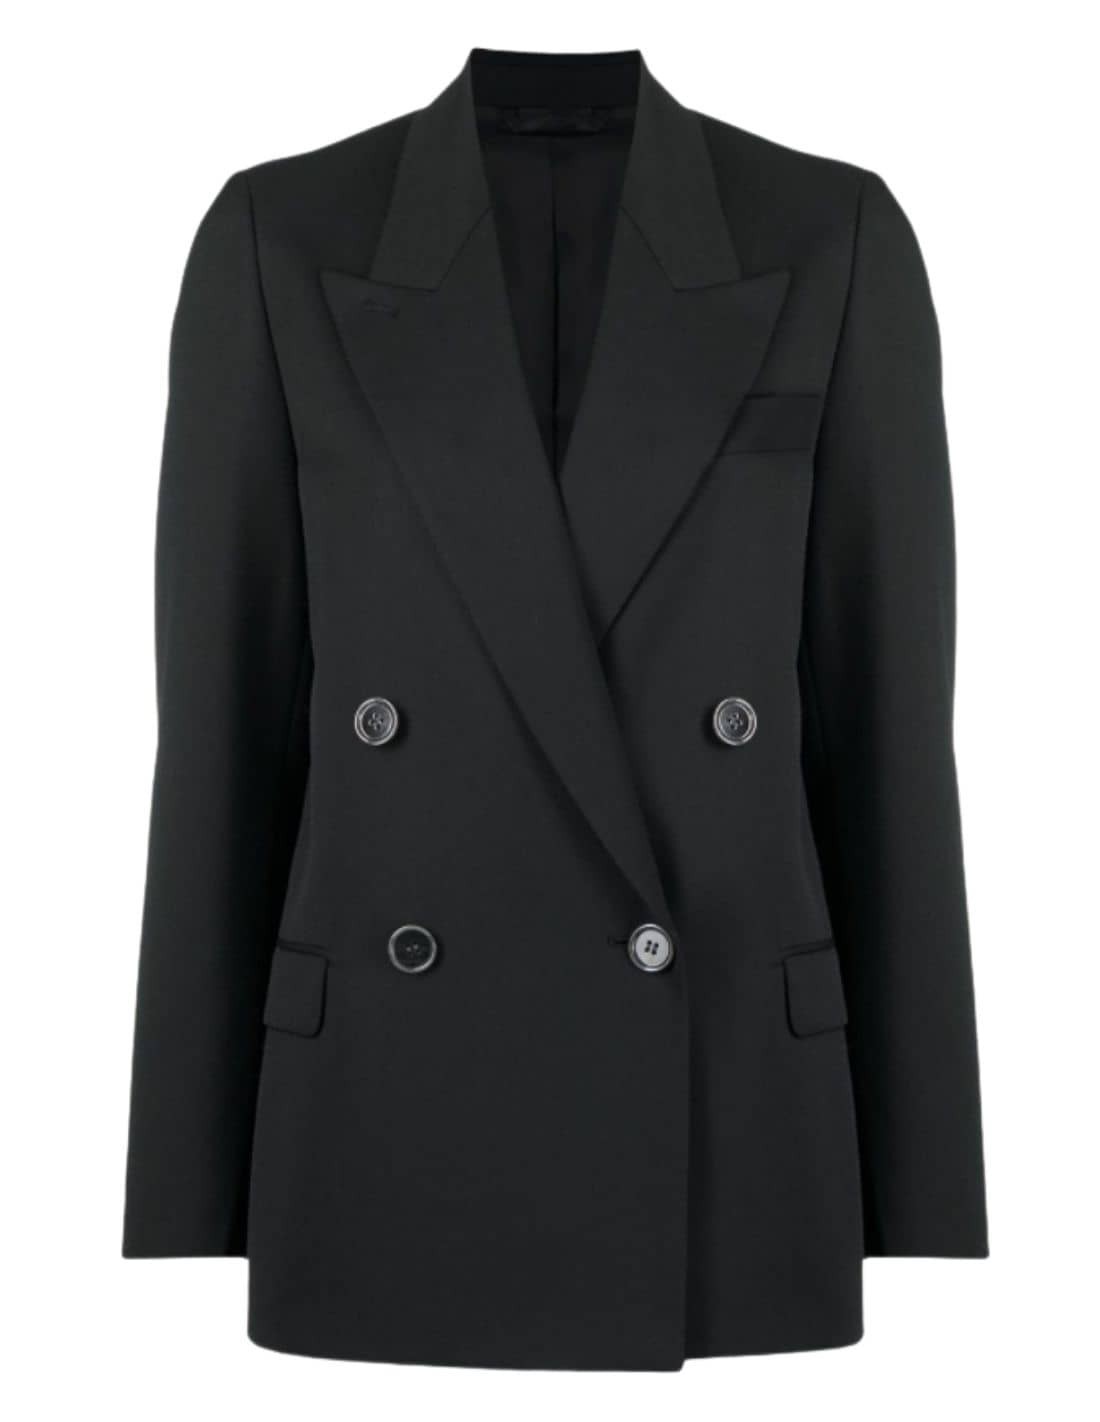 ACNE STUDIOS black double breasted blazer jacket with 4 buttons for ...